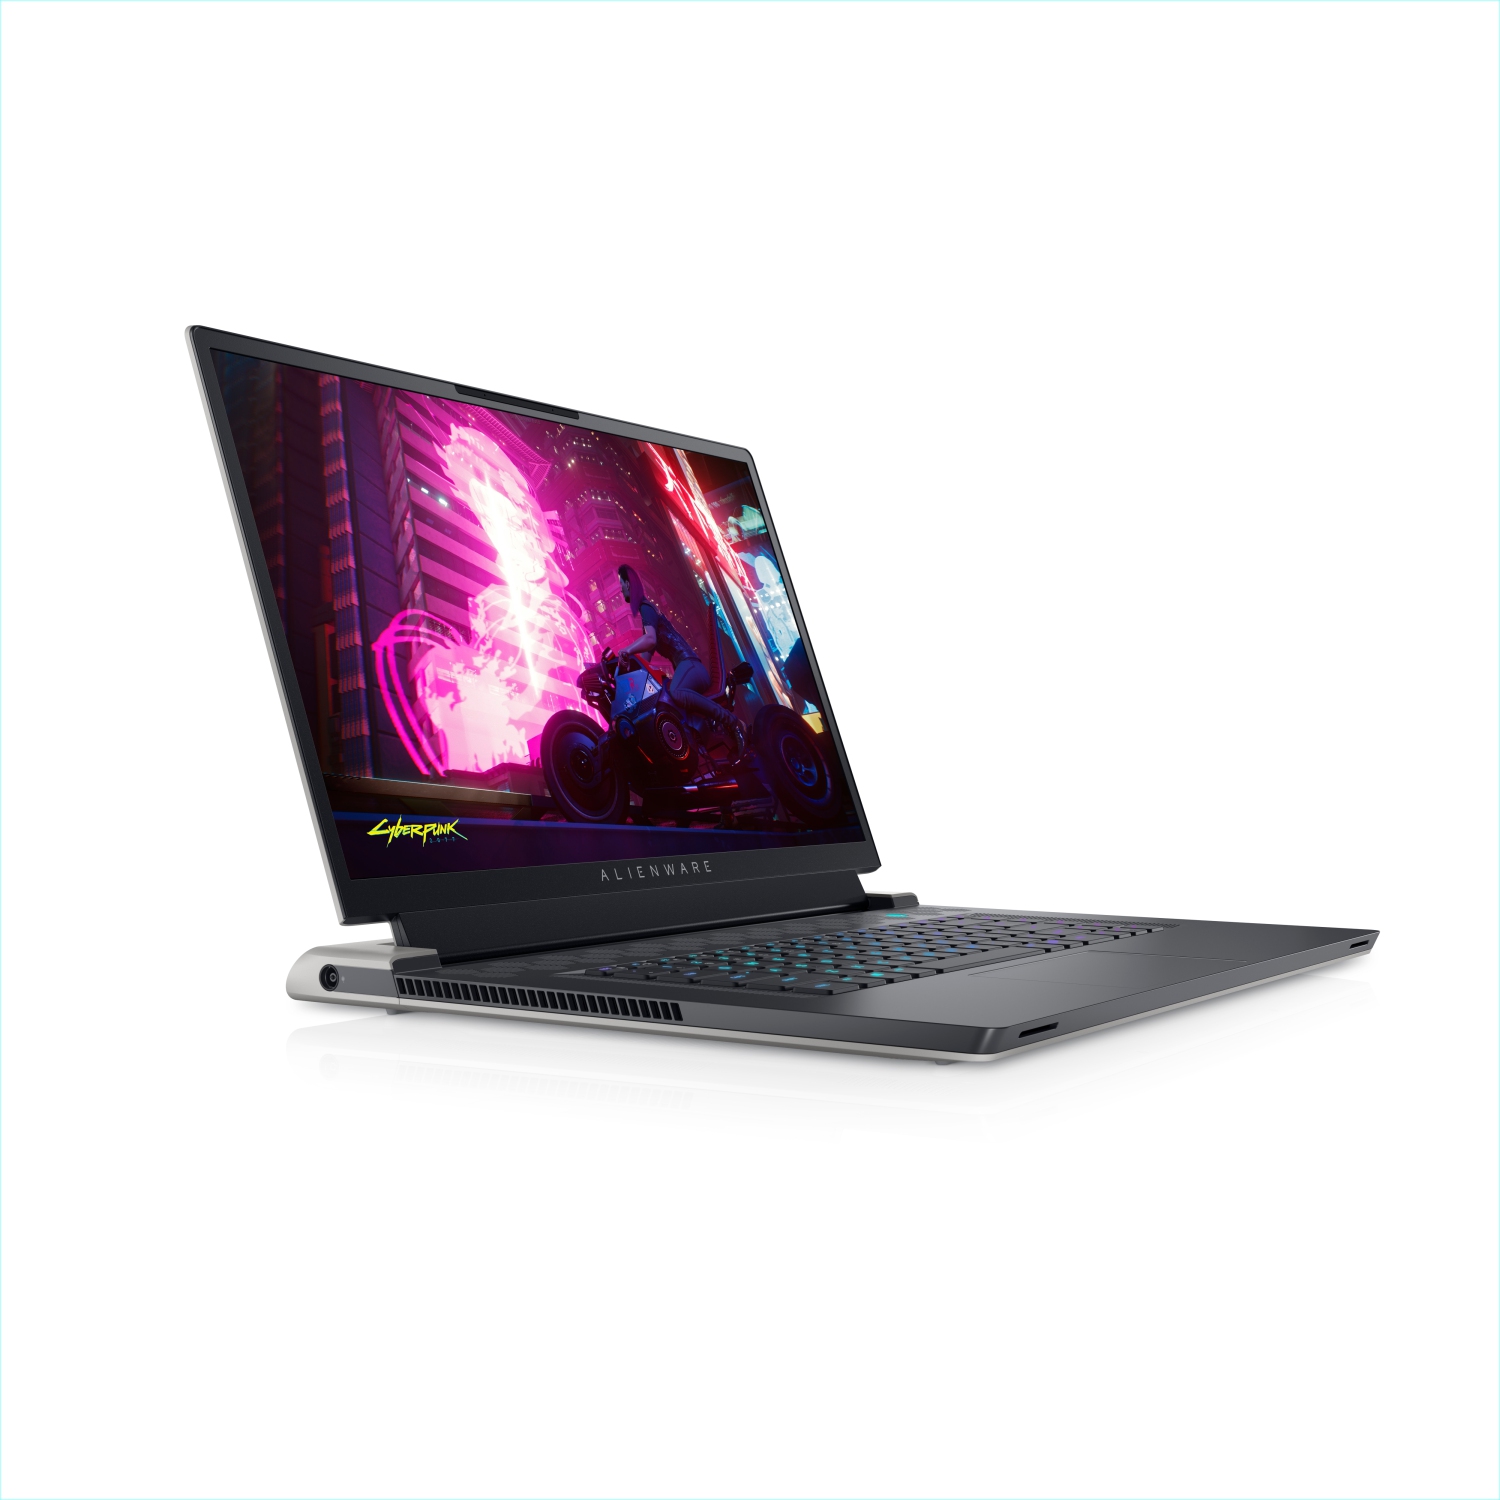 Refurbished (Excellent) - Dell Alienware X17 R1 Gaming Laptop (2021), 17.3" 4K, Core i9, 1TB SSD + 1TB SSD, 64GB RAM, RTX 3080, 8 Cores @ 5 GHz, 11th Gen CPU Certified